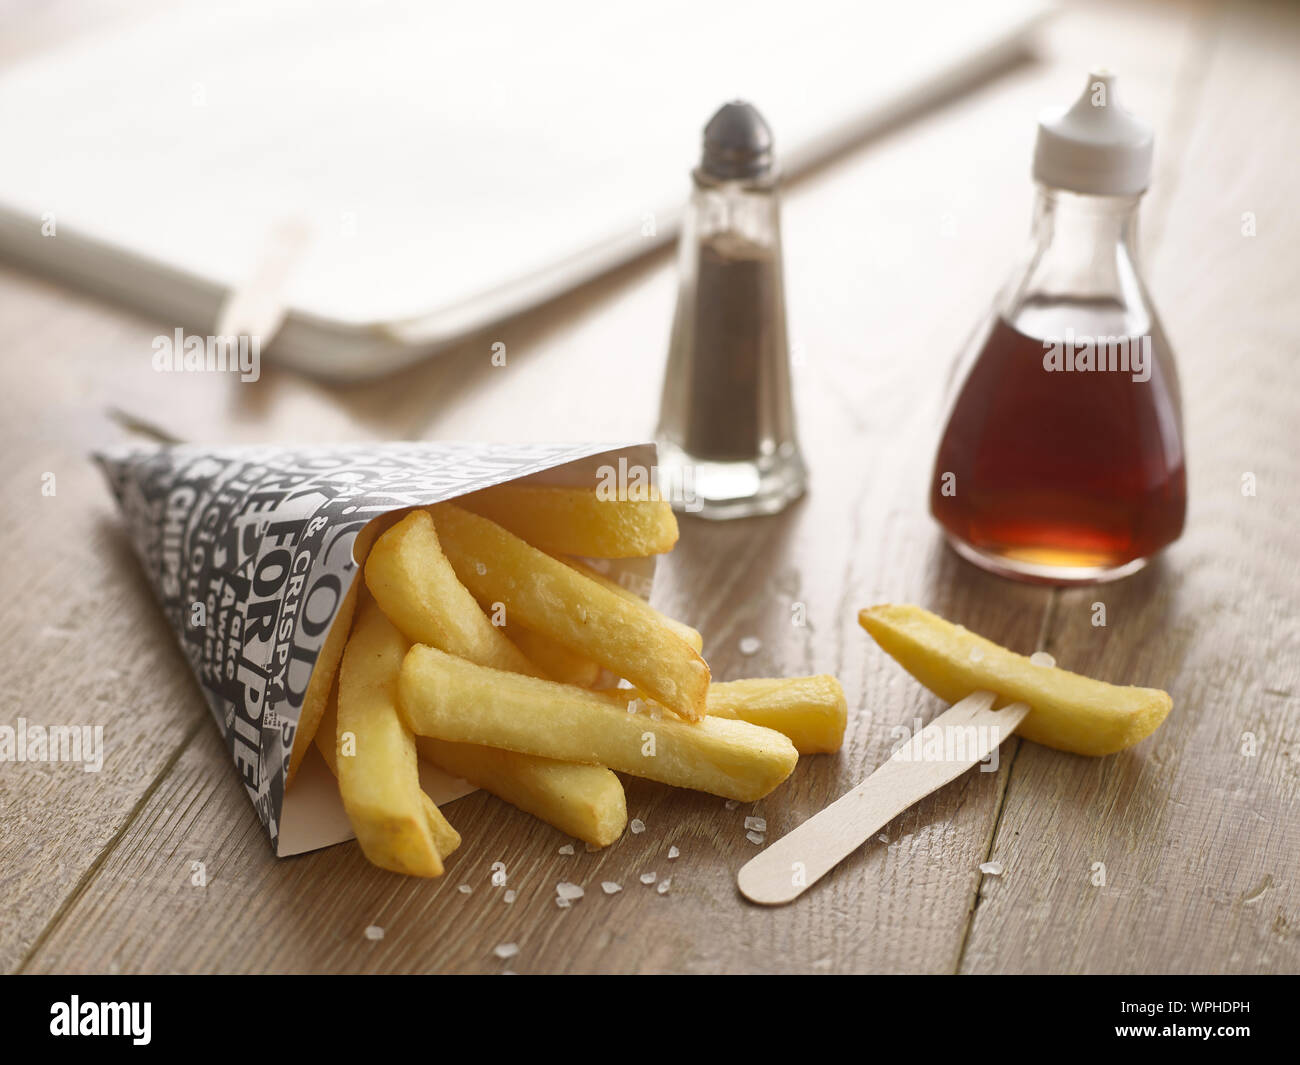 chip shop chips Stock Photo